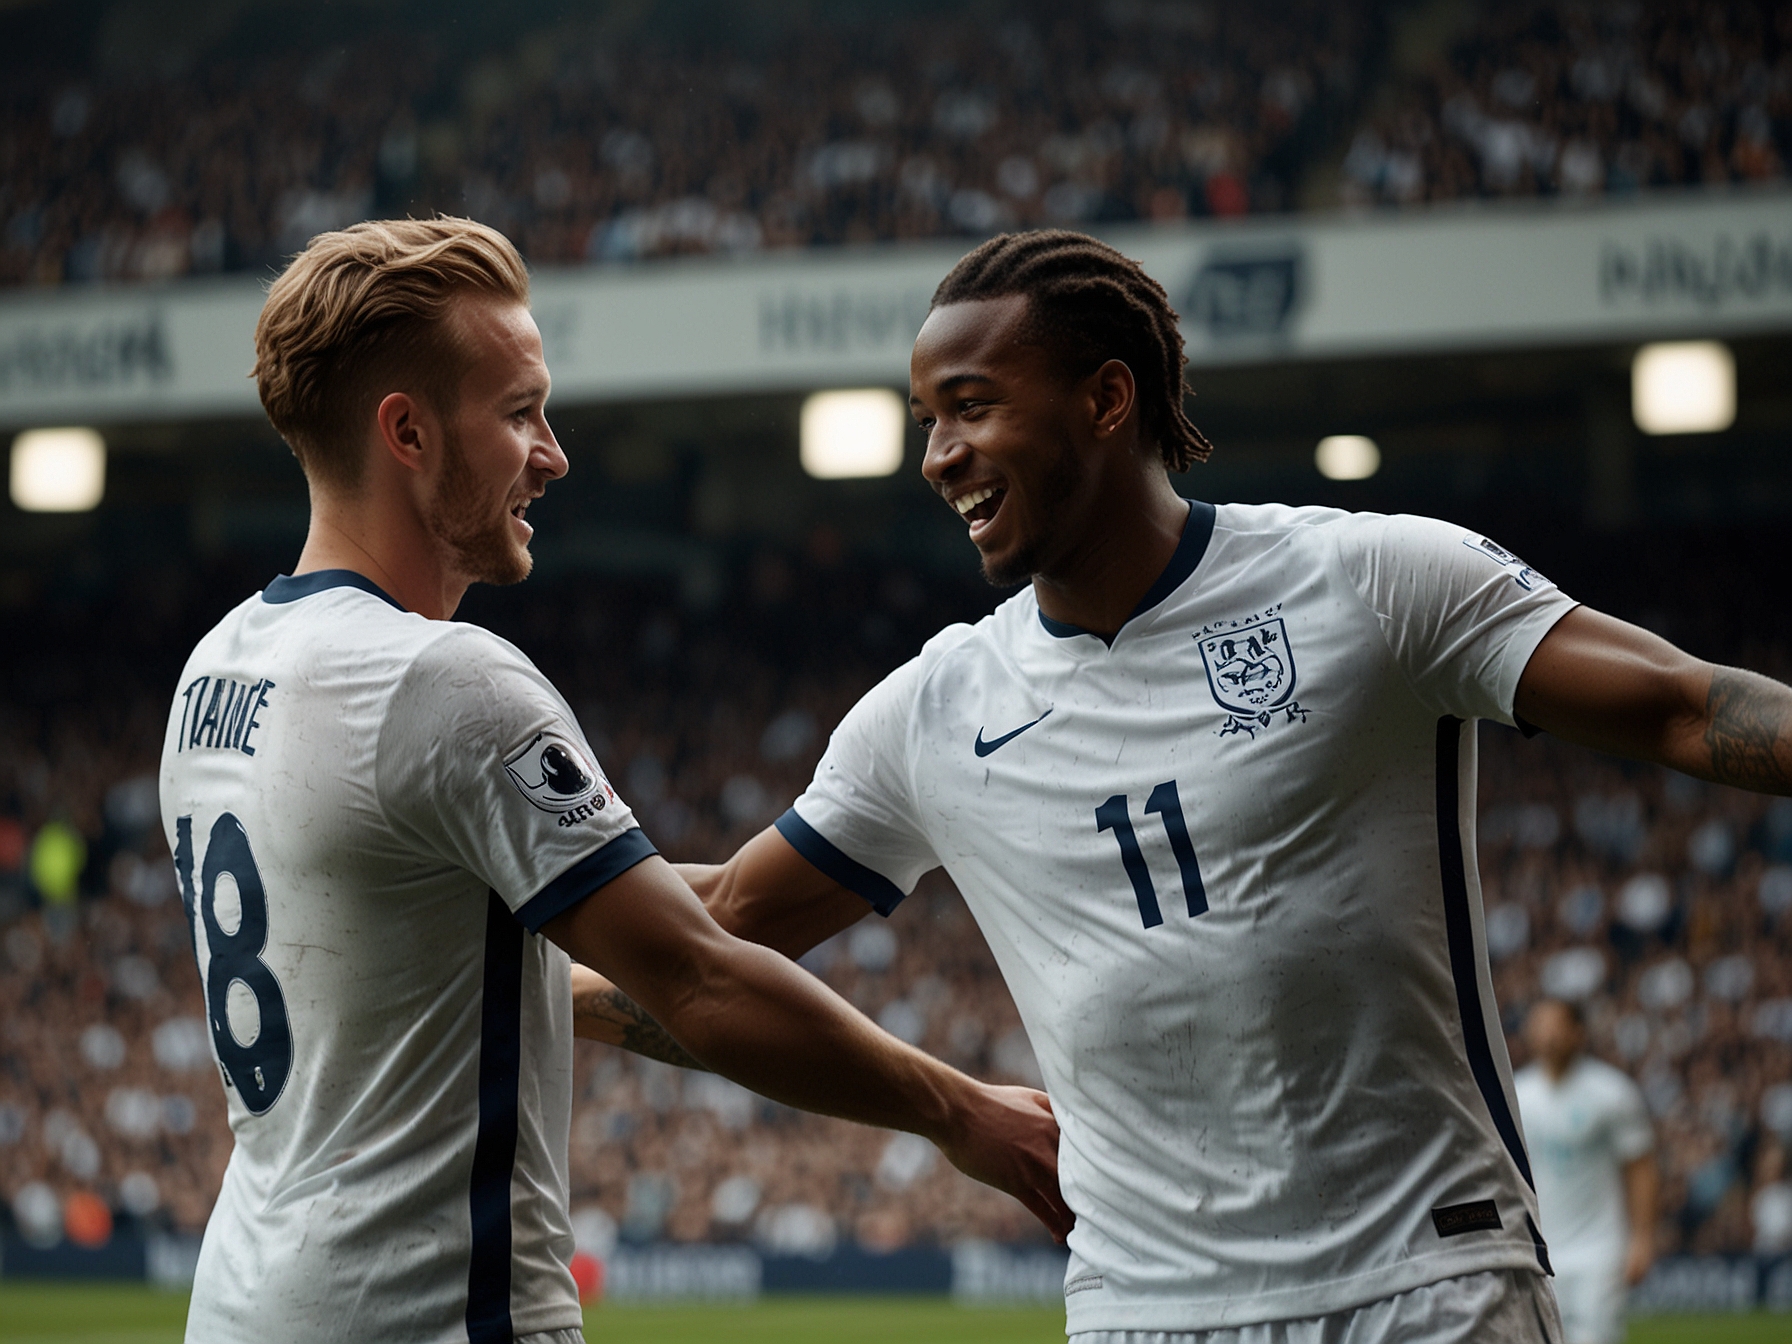 A photo capturing Ivan Toney in a supportive gesture towards Harry Kane. Toney's endorsement comes at a critical time, emphasizing teamwork and Kane's potential comeback.